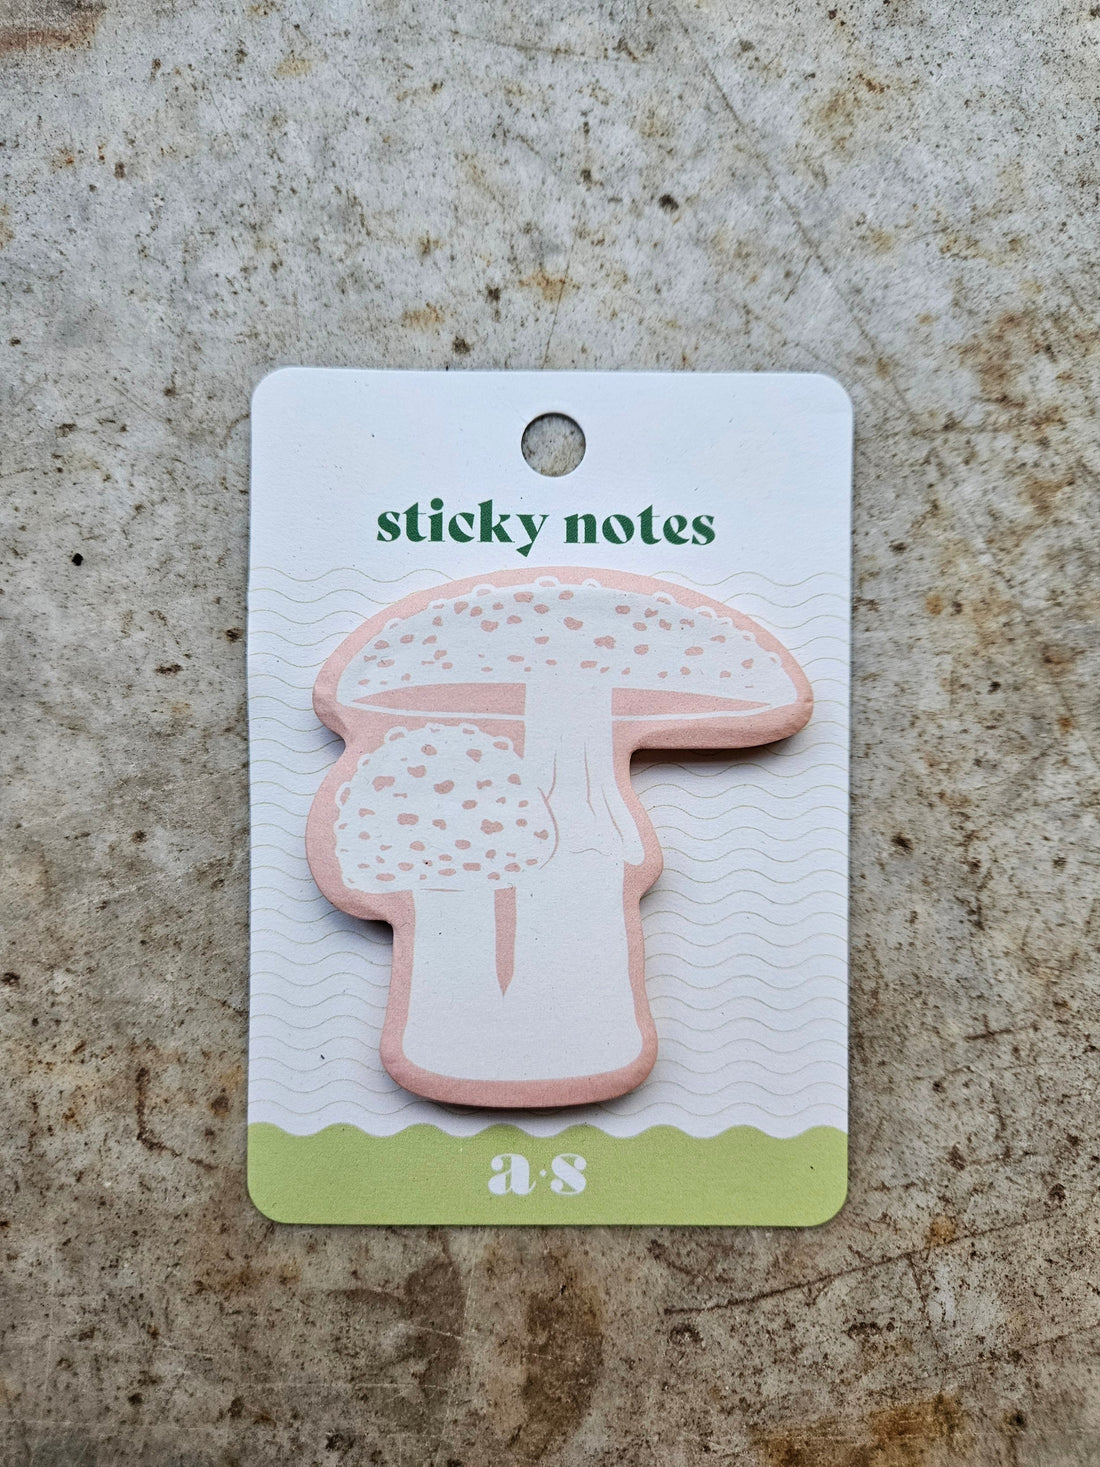 Mushroom Sticky notes by Another Studio